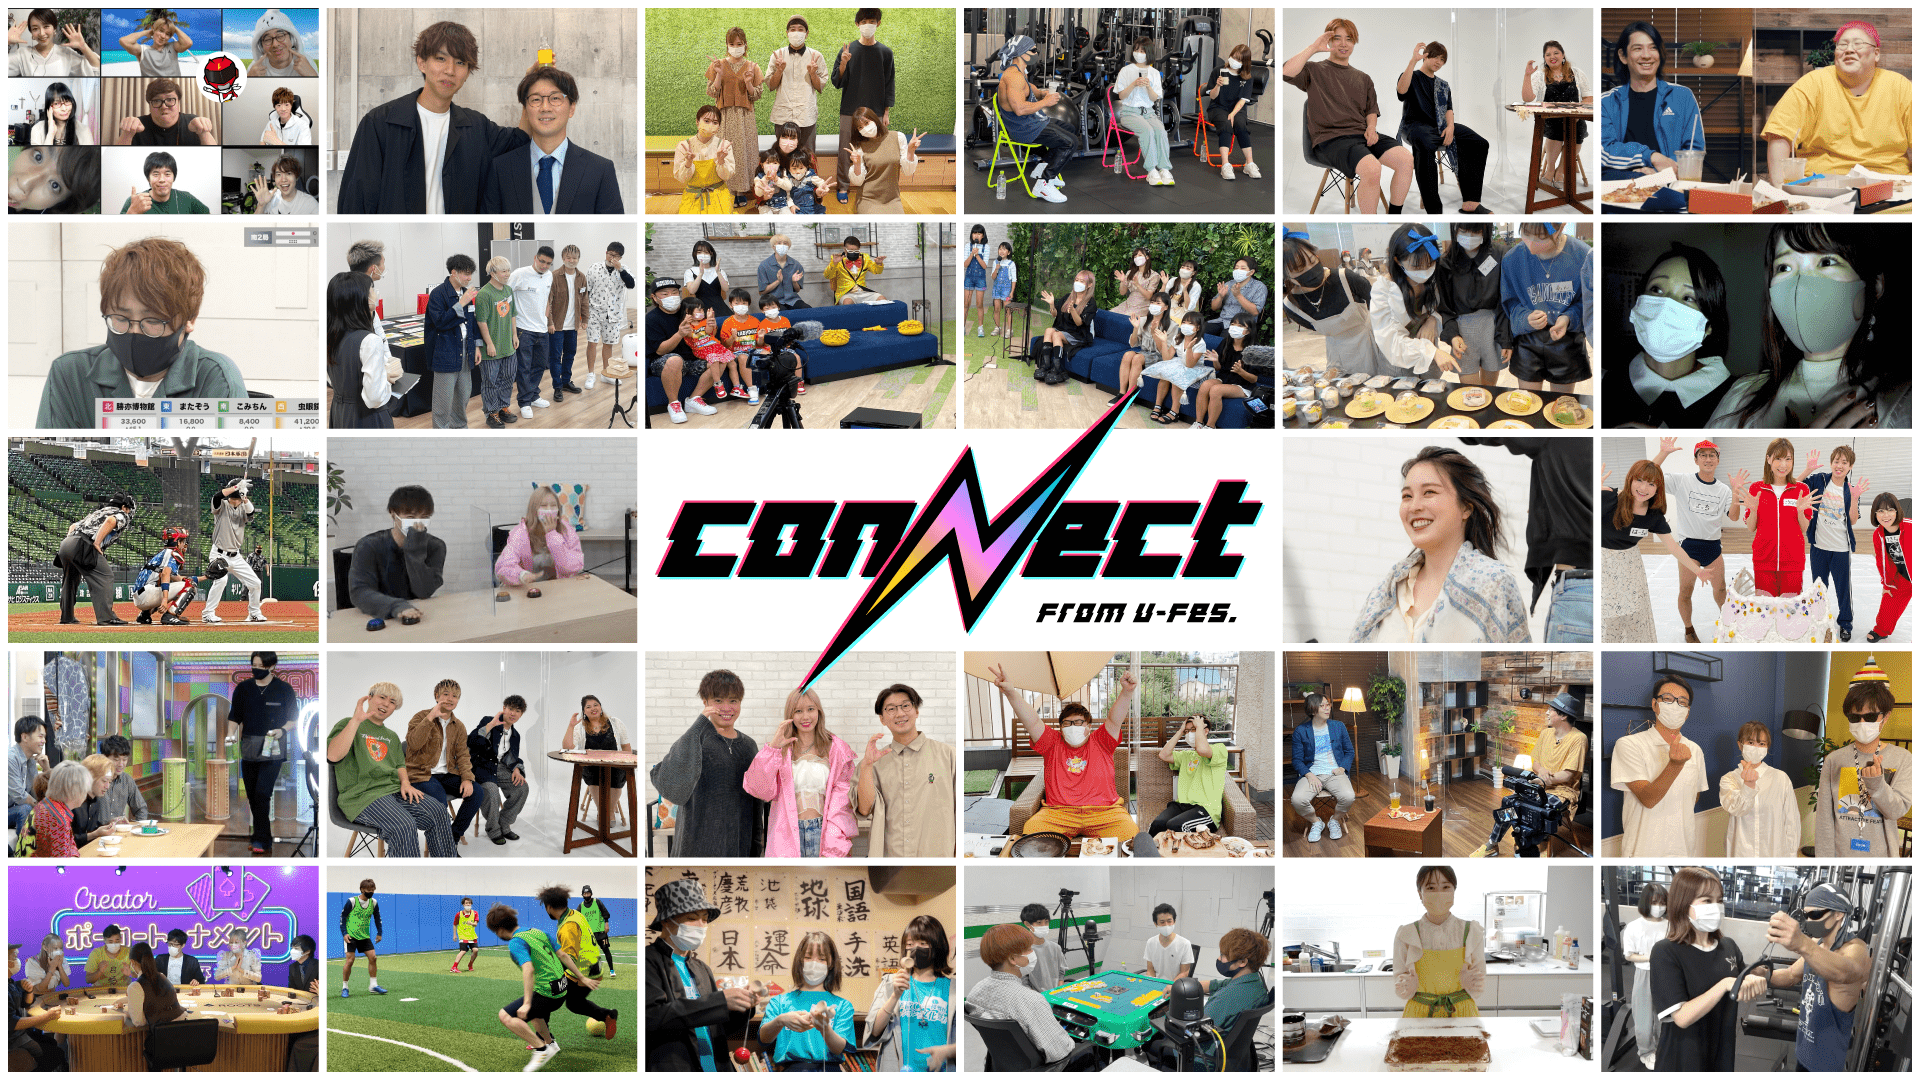 CONNECT FROM U-FES.